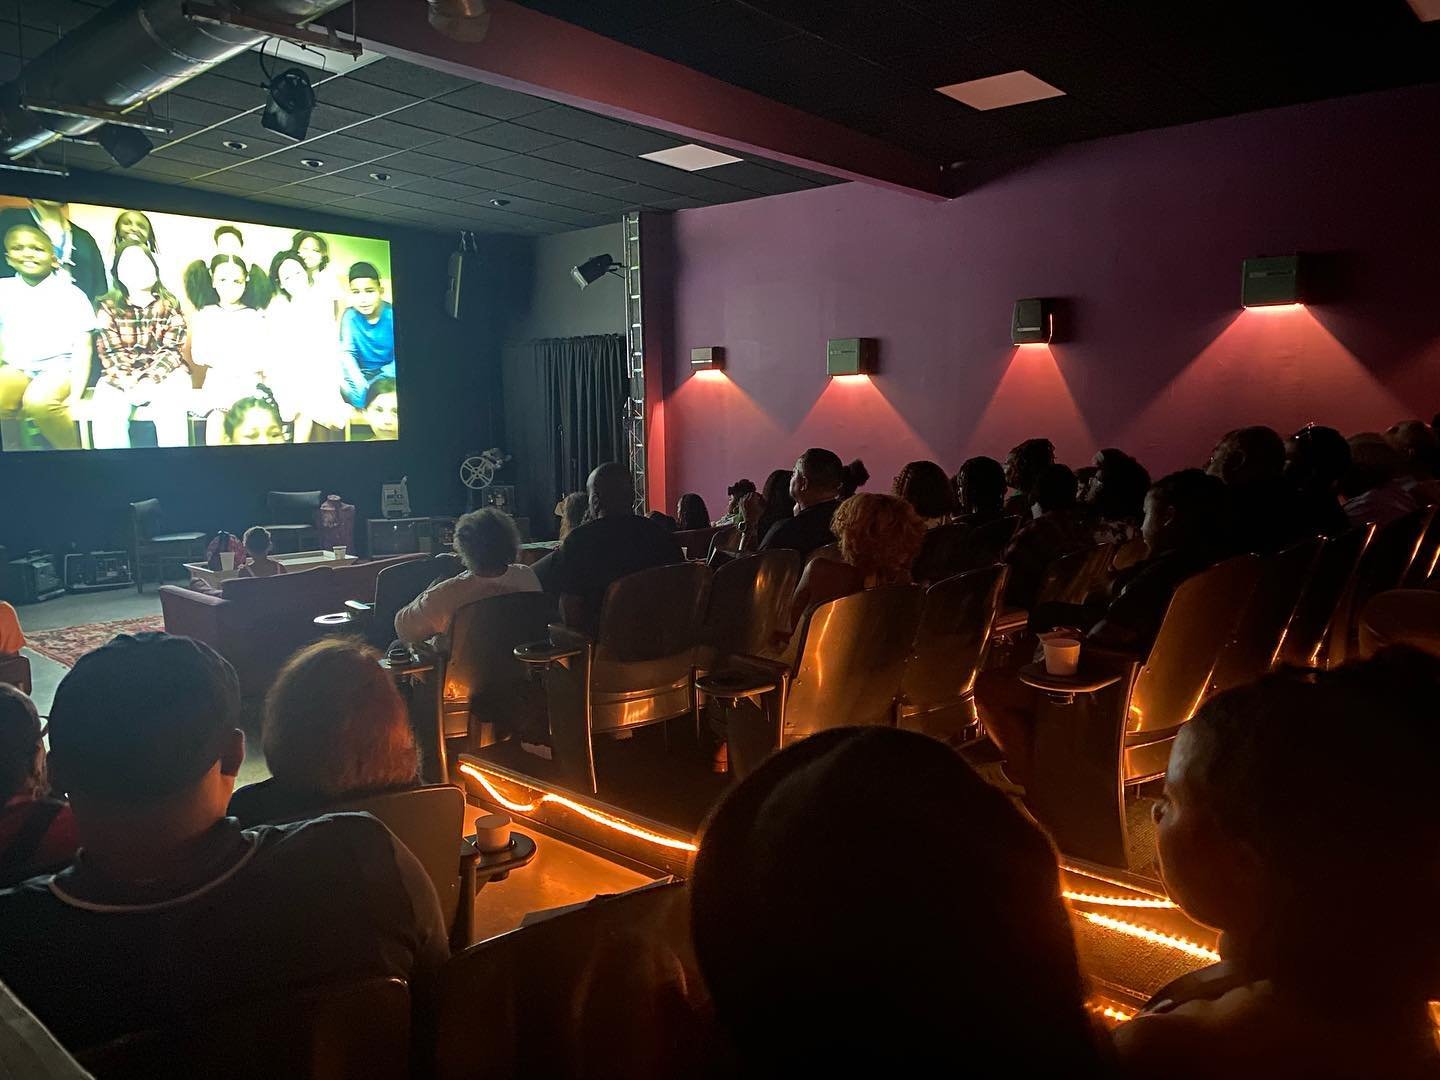 A packed house right now for family cinema! Join us all day today at Thalian Hall and Jengo&rsquo;s Playhouse for the North Carolina Black Film Festival (@ncblackfilm). #3ChambersFest is proud to be a sponsor this year.

View the schedule and get tic